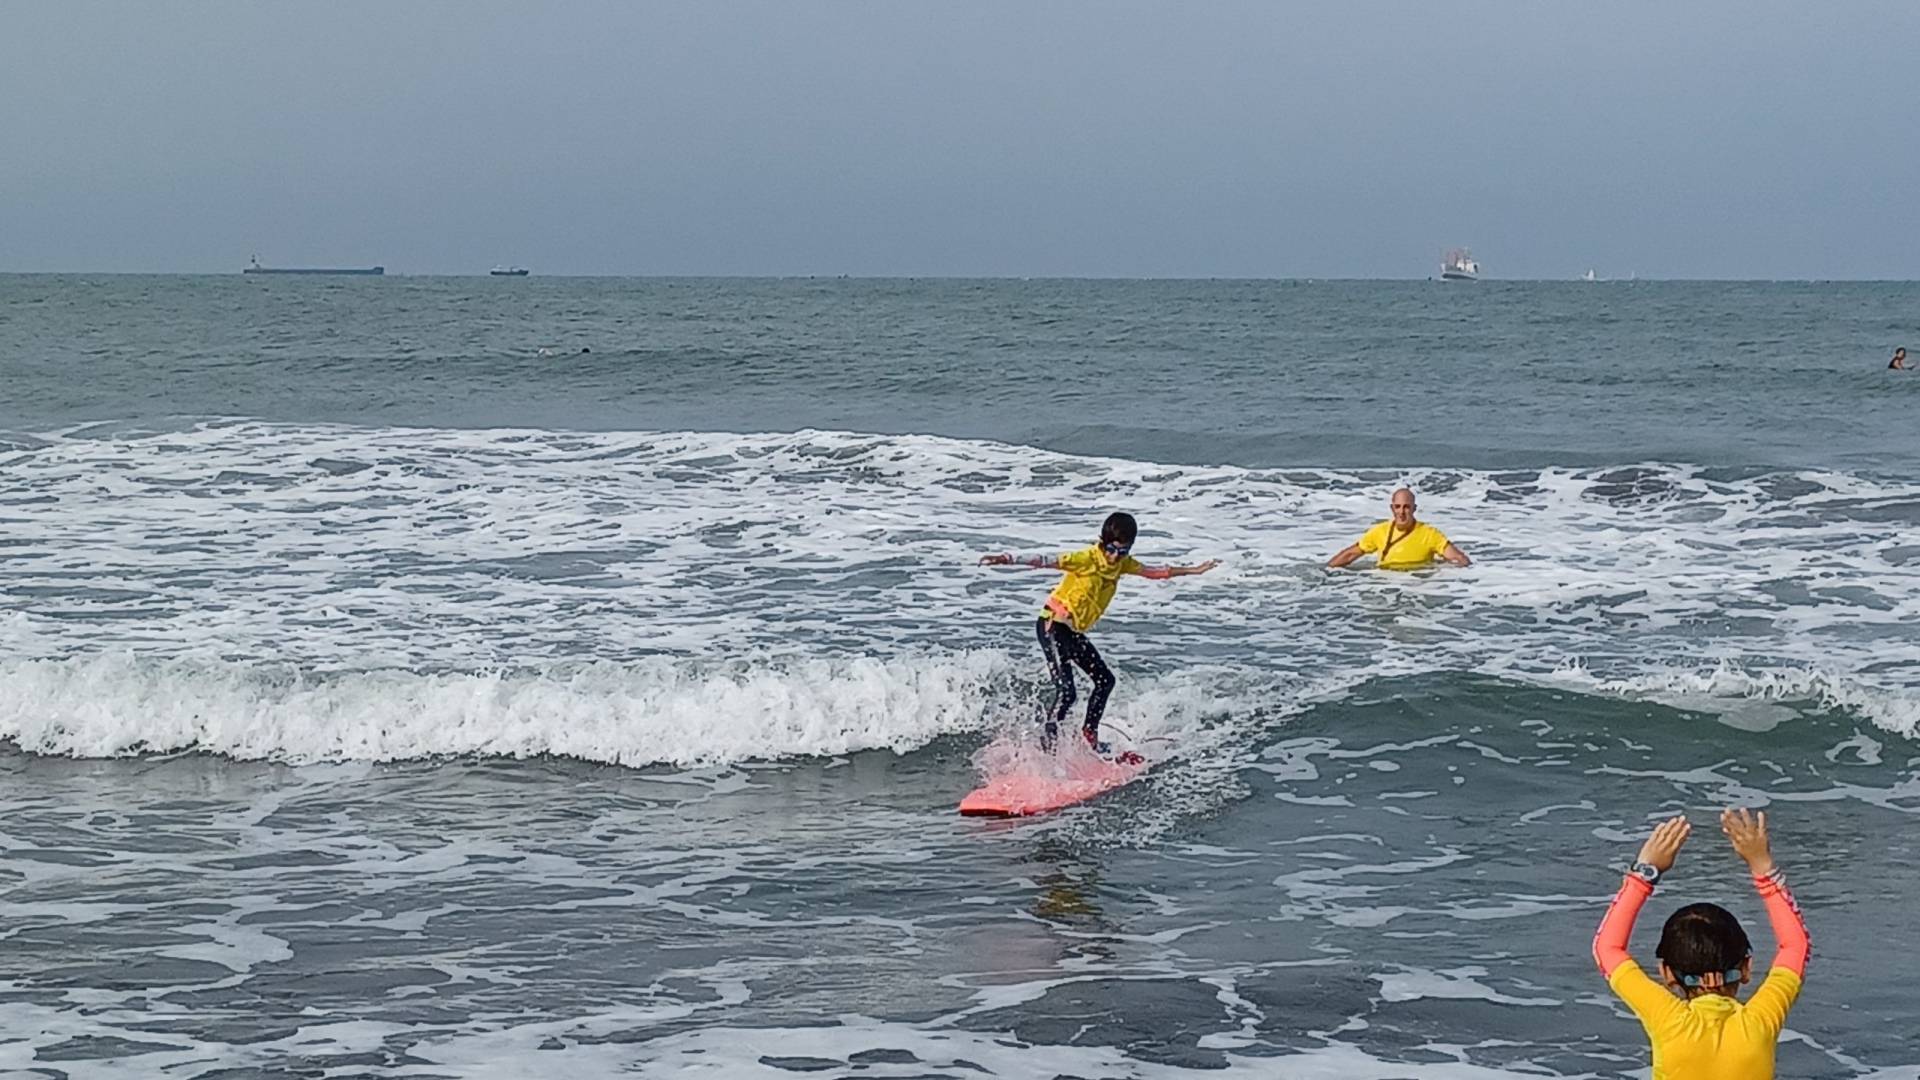 Child stands up on a surfboard. Coach in the background. Child supporter celebrating in the foreground.